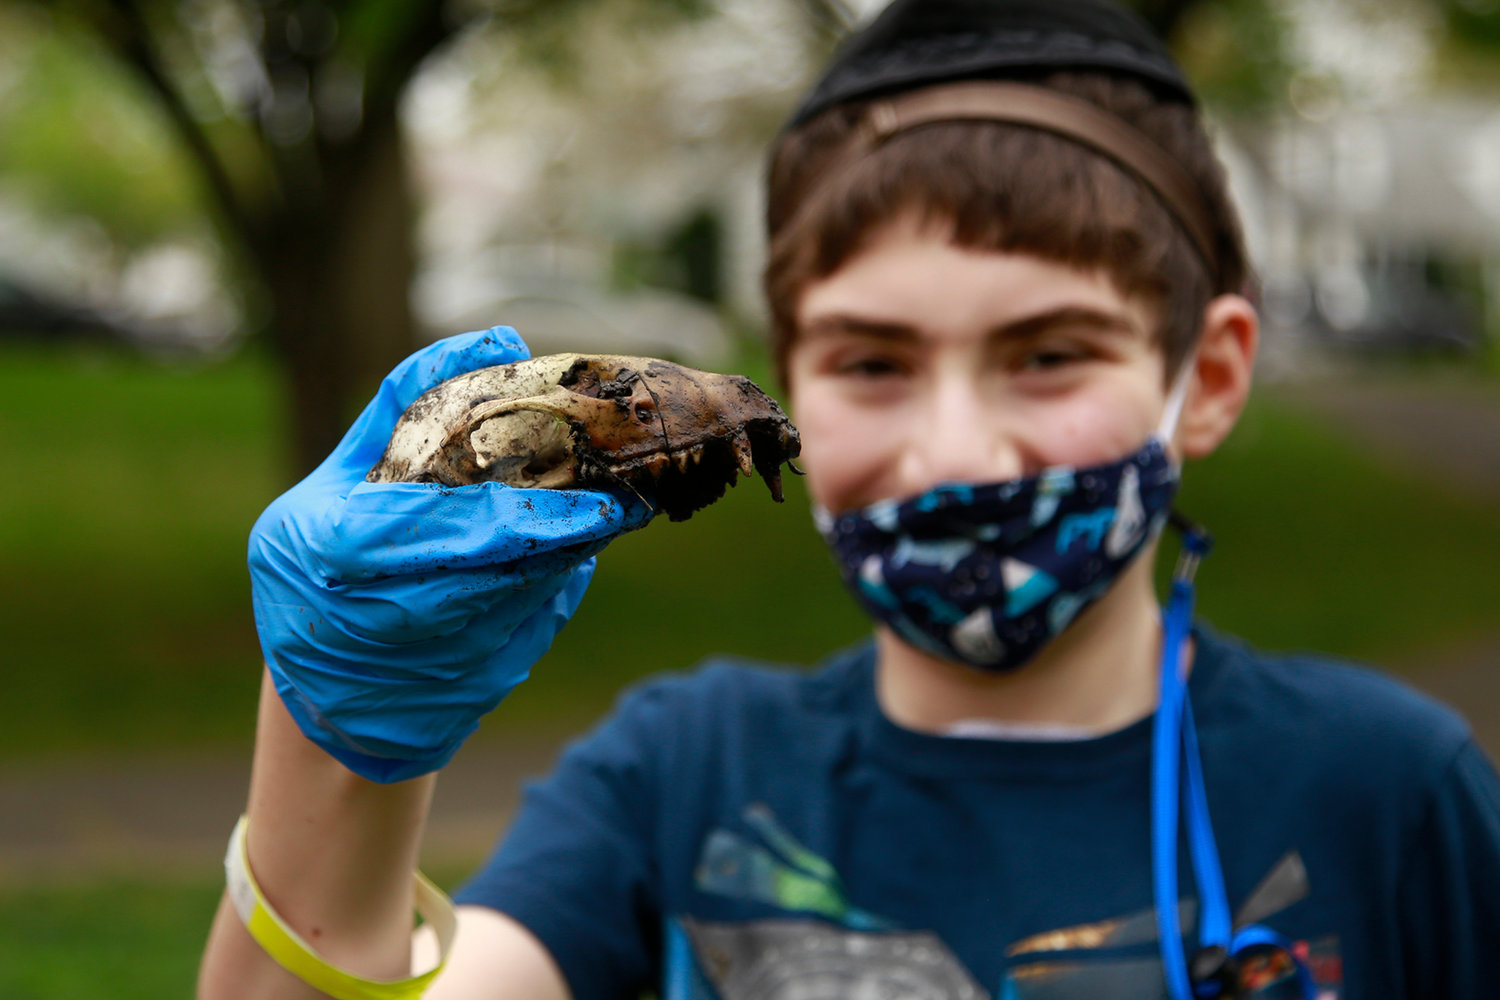 Twelve-year-old volunteer Rafi Taubenfeld came up with an animal skull during the West Hempstead Community Support Association’s annual cleanup at Hall’s Pond Park on May 2.